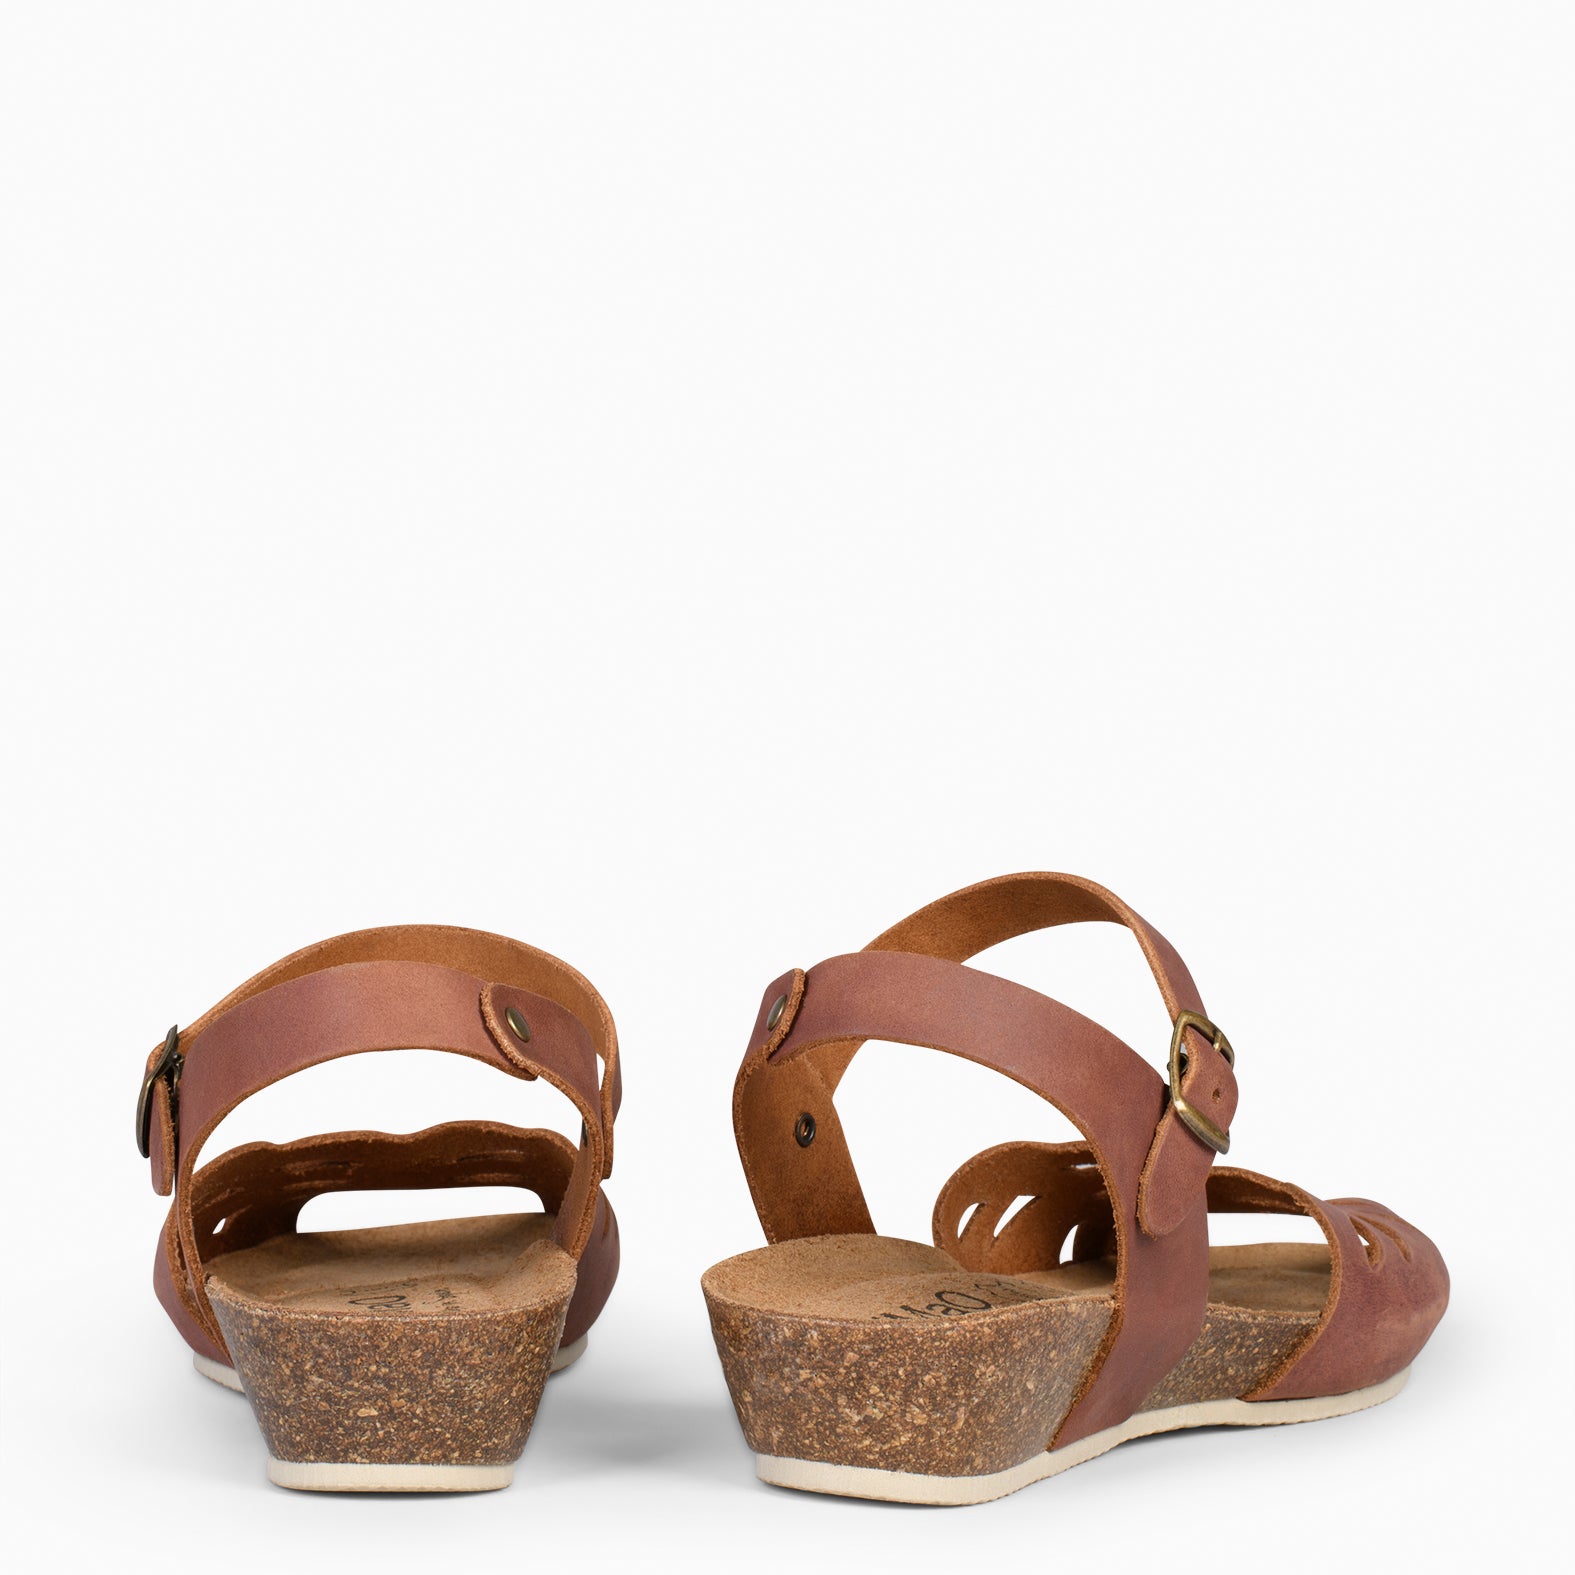 ALOE – CAMEL BIO sandals with wedge